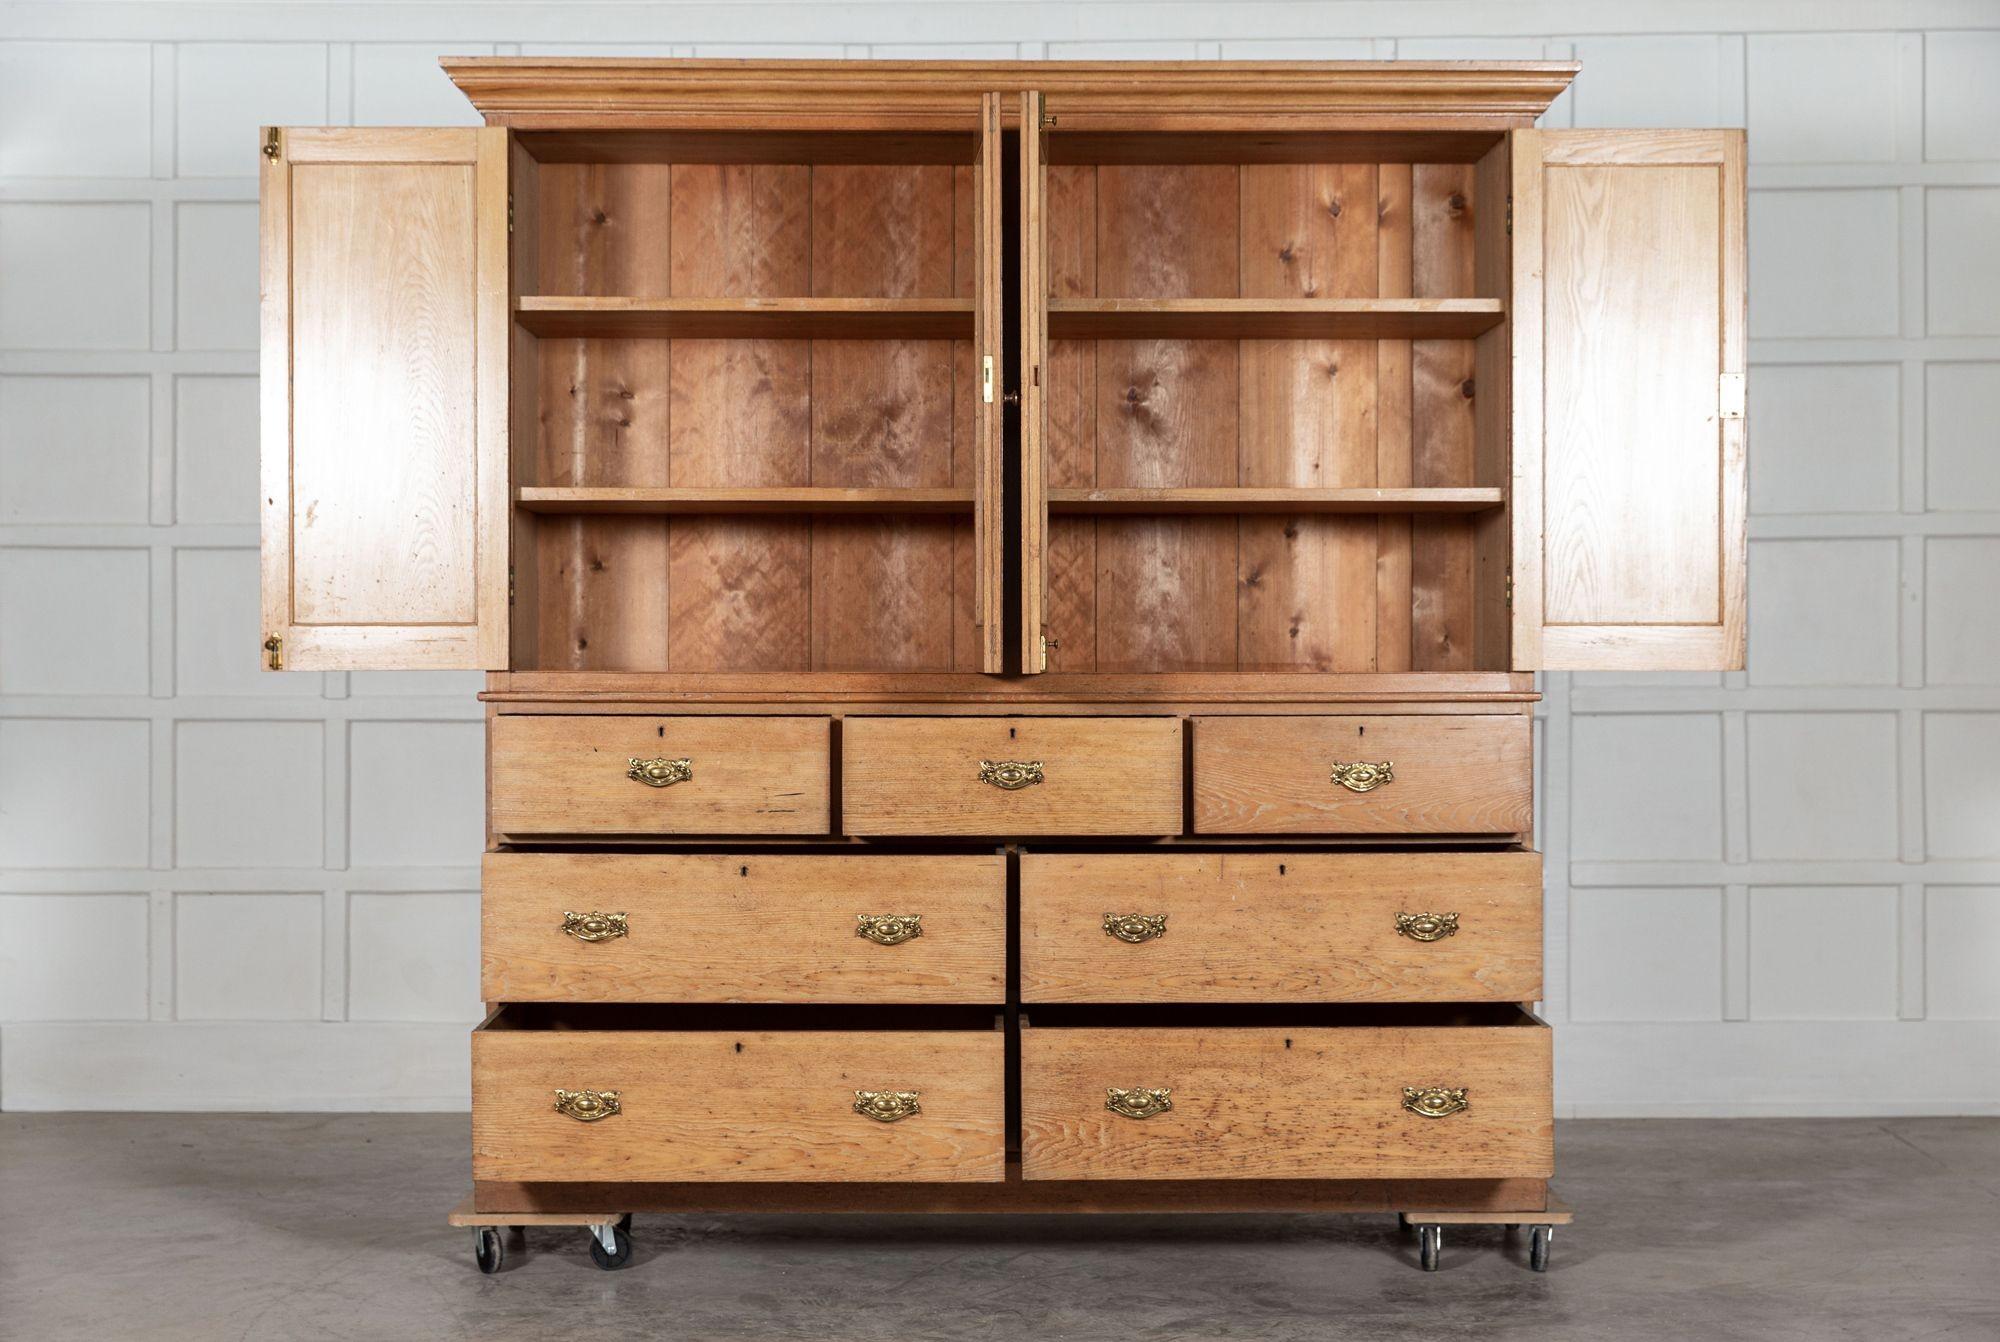 circa 1870
Large 19th C English ash housekeepers cupboard
Exceptional quality
sku 1365
We can also customise existing pieces to suit your scheme/requirements. We have our own workshop, restorers and finishers. From adapting to finishing pieces